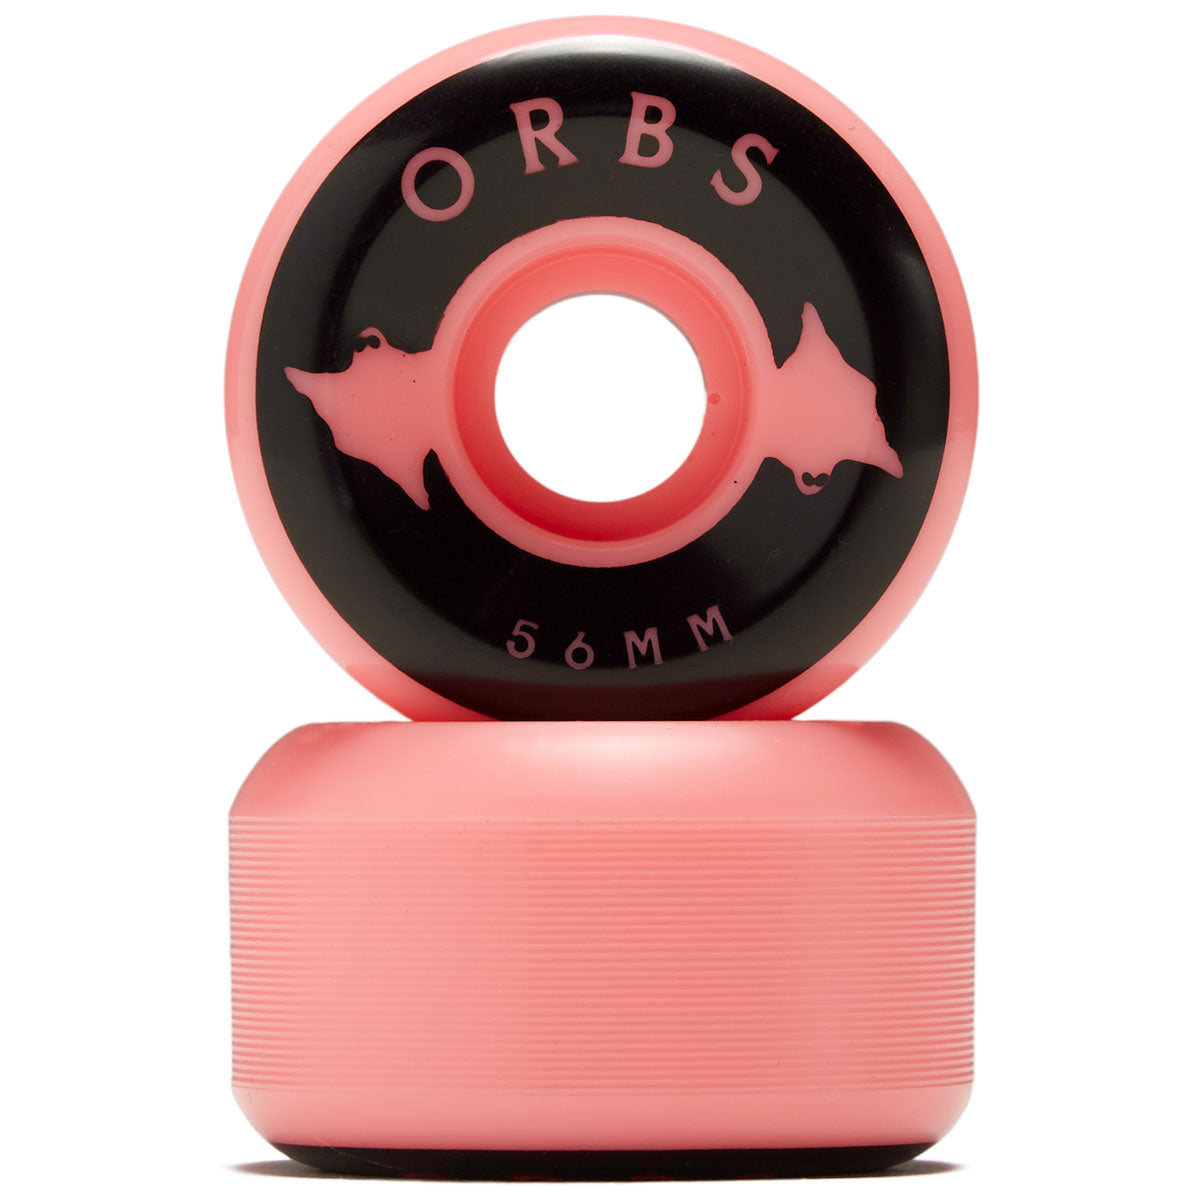 Welcome Orbs Specters Conical 99a Skateboard Wheels - Coral - 56mm image 2